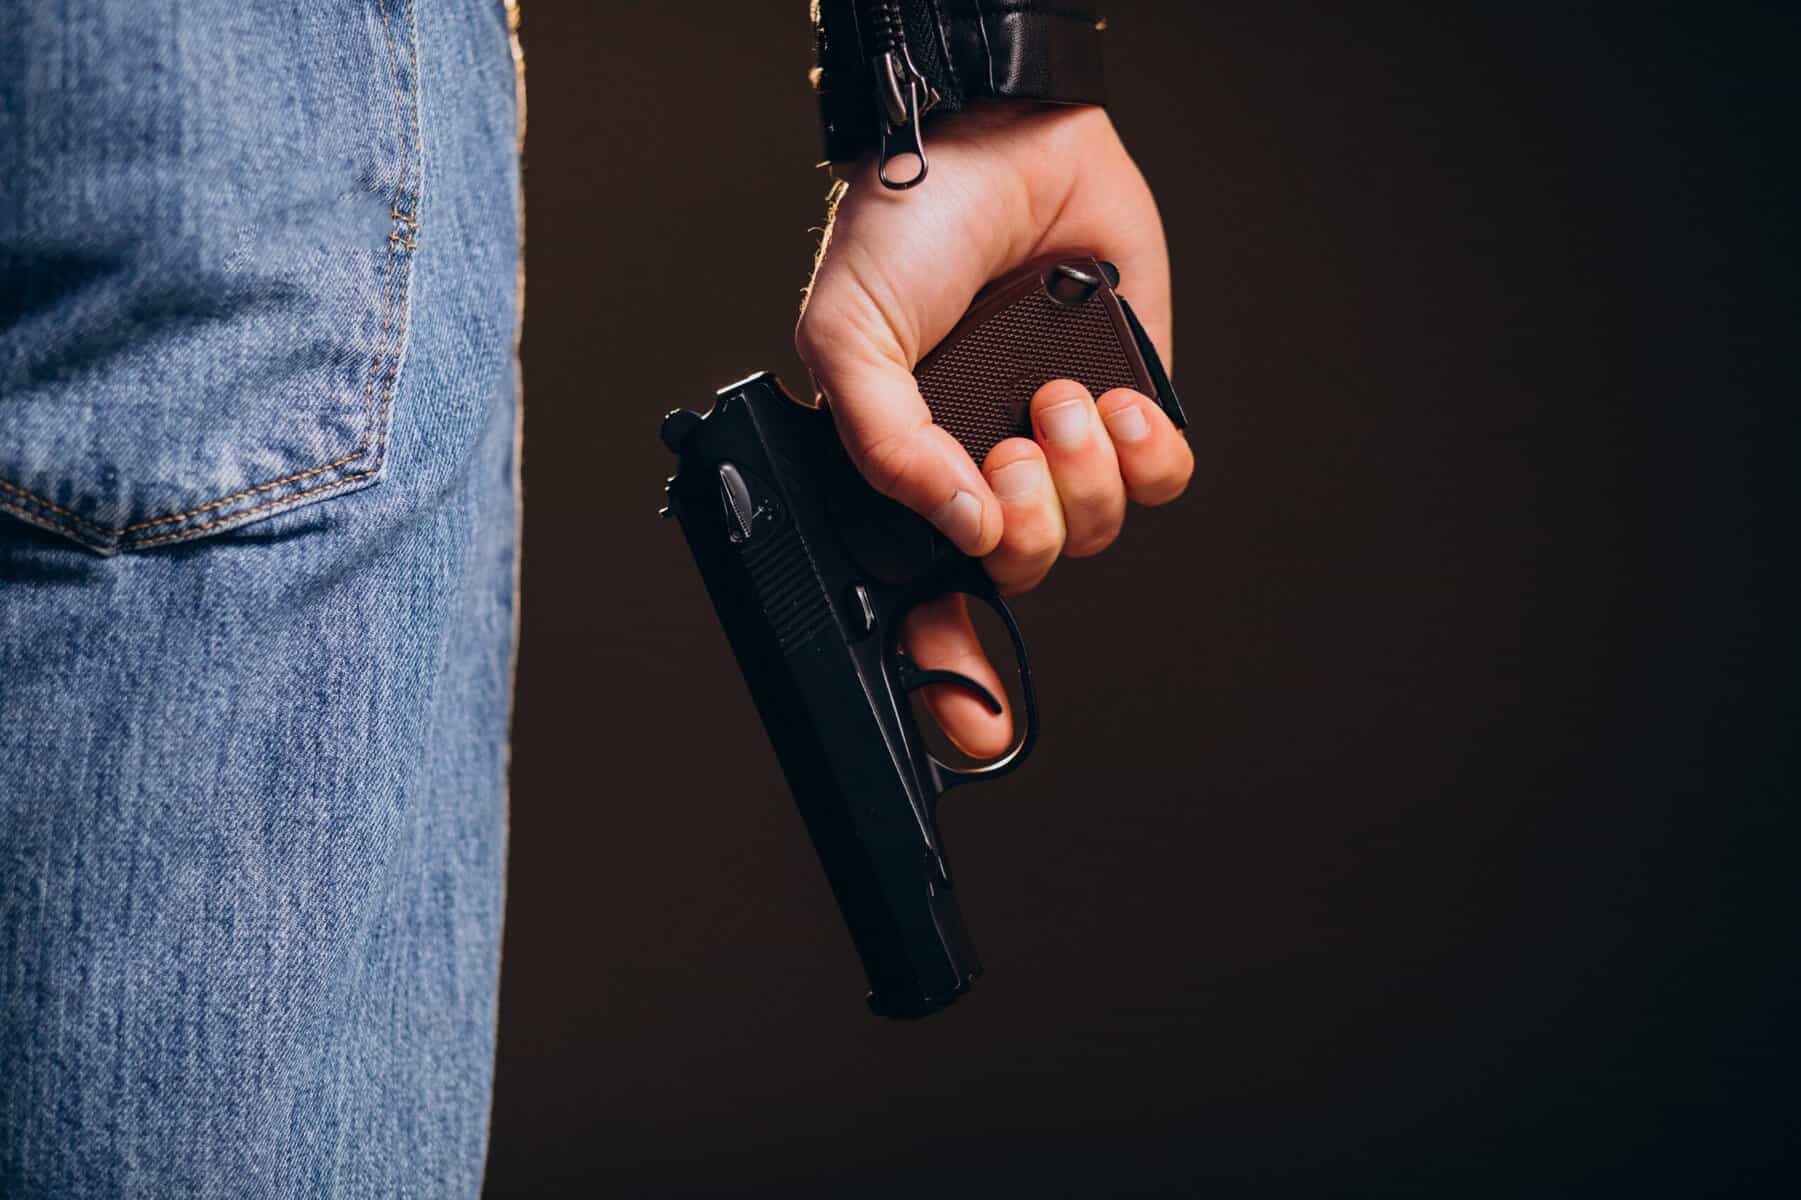 Part of a man's torso is shown from the rear with his hand at his side holding a handgun.